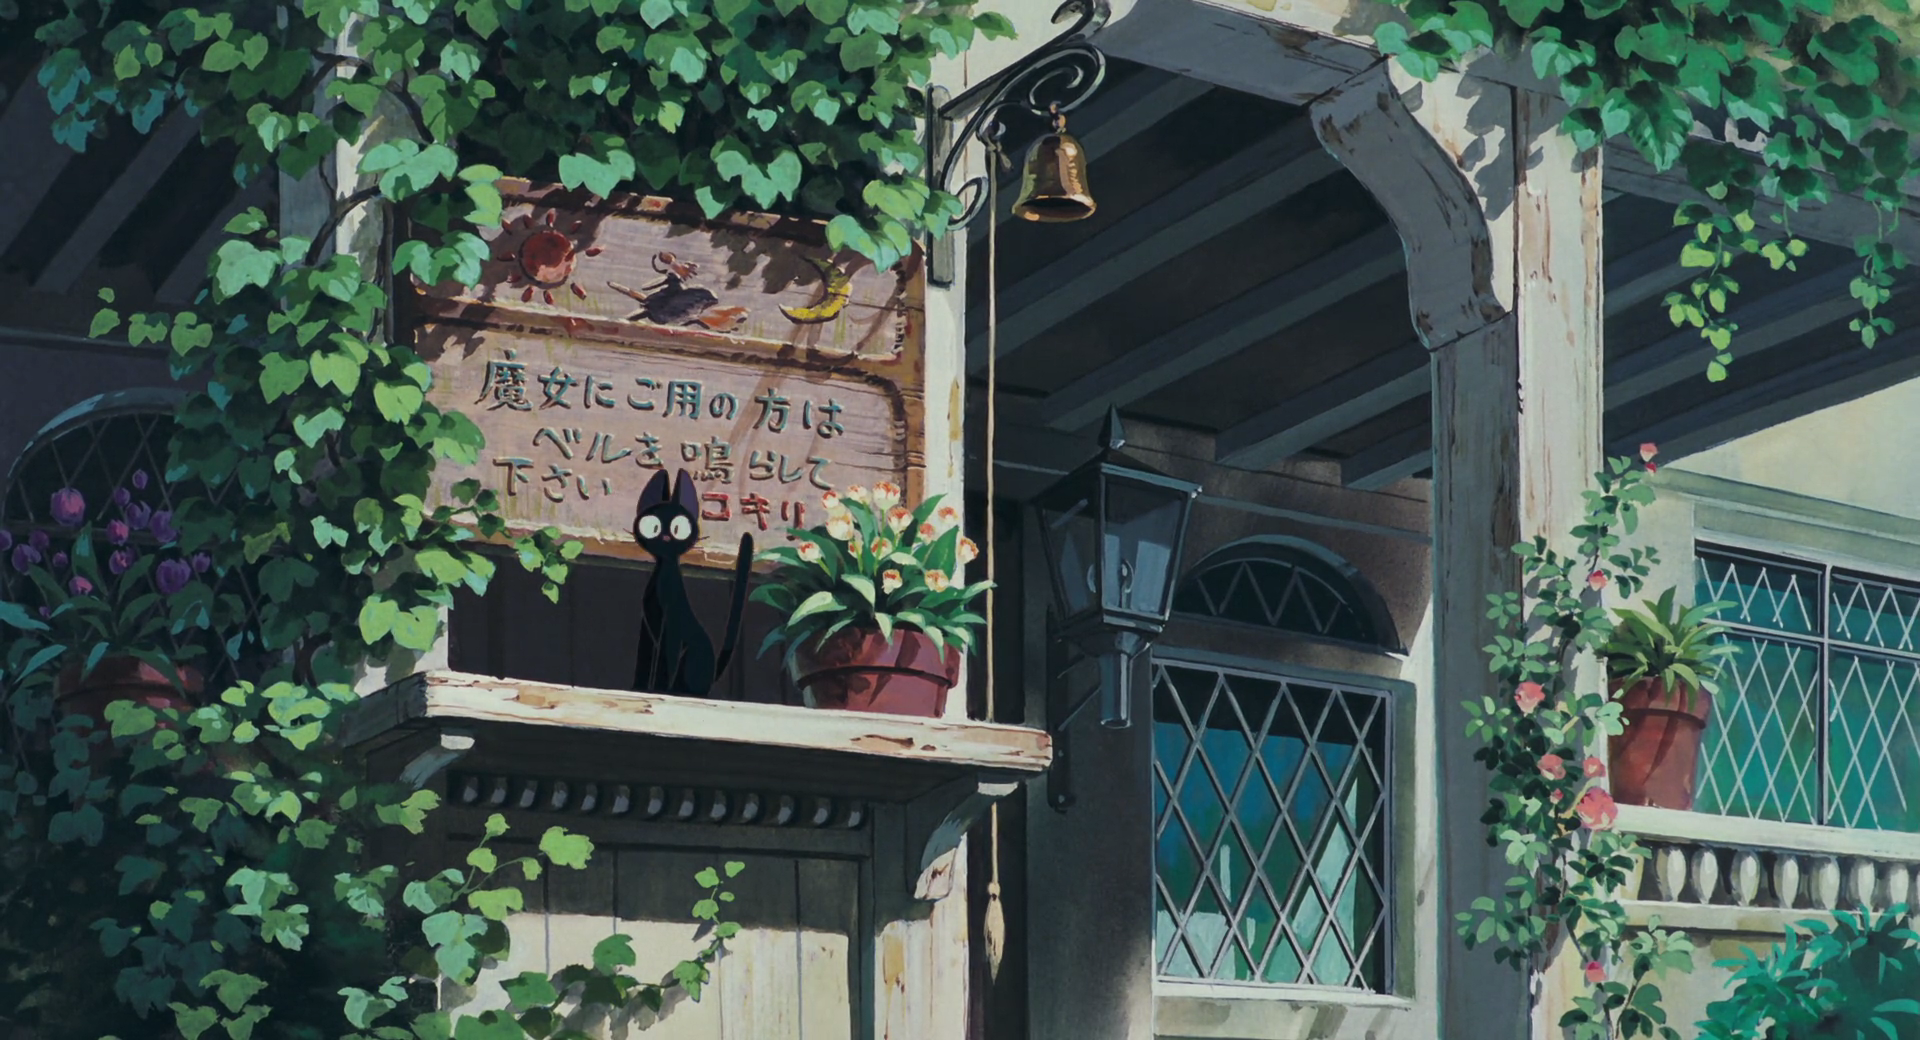 Kiki's Delivery Service Wallpaper and Background Image | 1920x1040 | ID